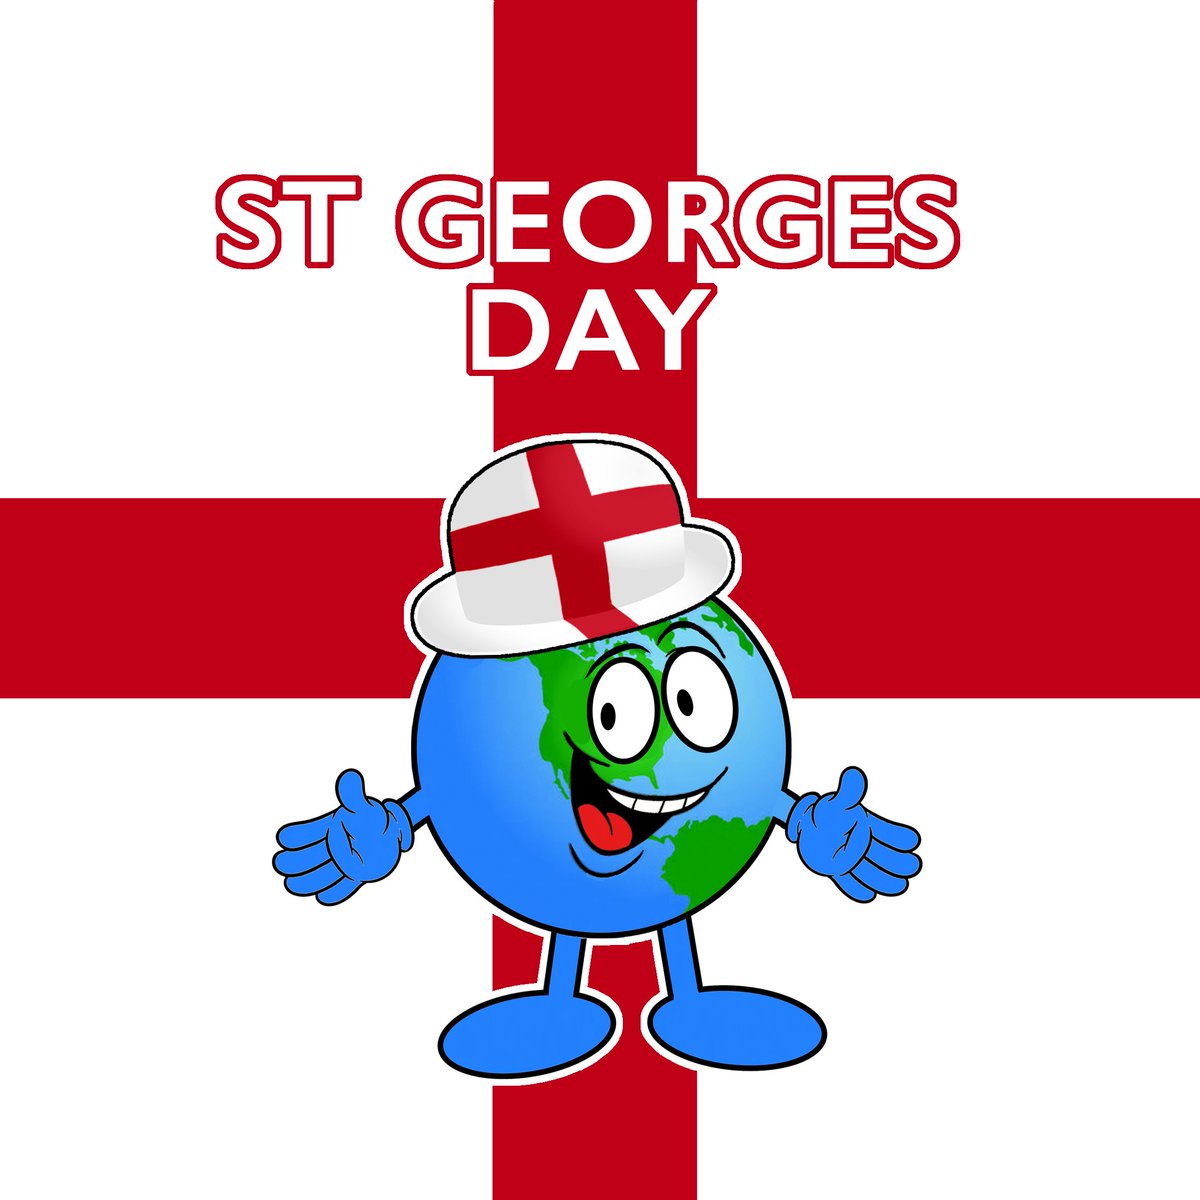 Happy St. Georges day! Learn about English and British culture with interactive culture games at culturebuffgames.com

#englishculture #stgeorgesday #english  #intercultural #britishculture #culturalexchange #internationalstudents #studyabroad